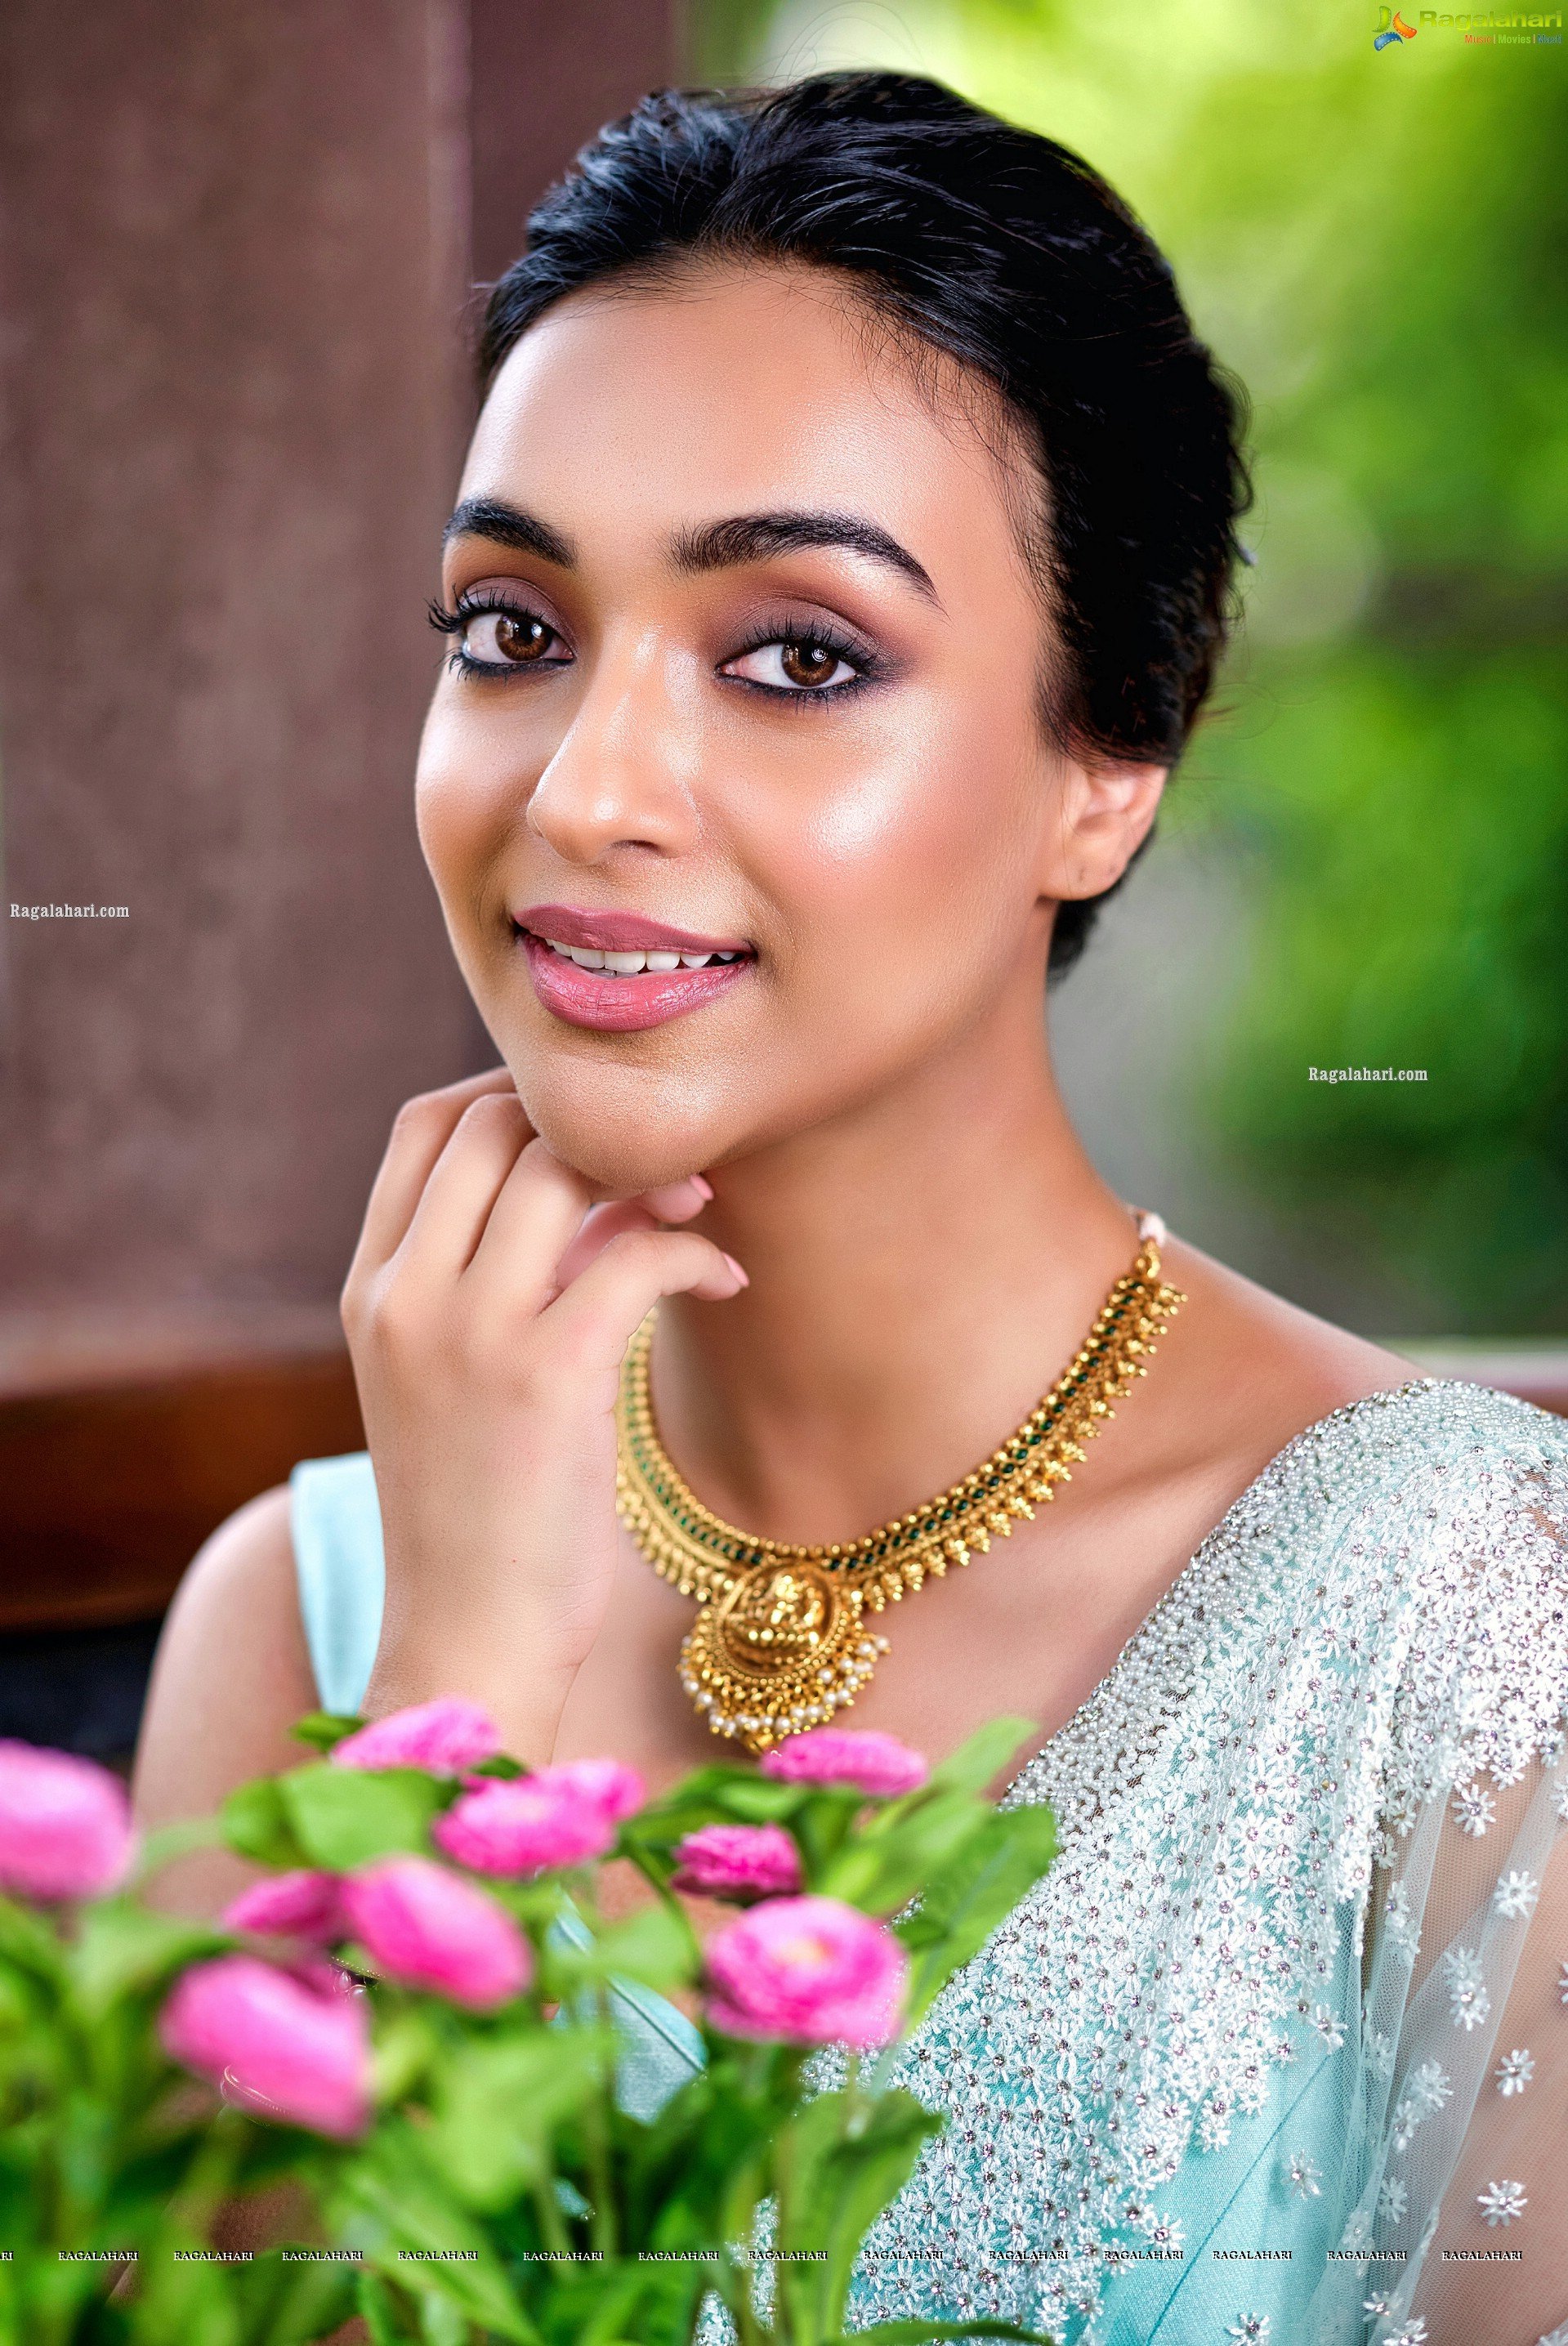 Amrin Qureshi Latest Photoshoot Images, HD Gallery